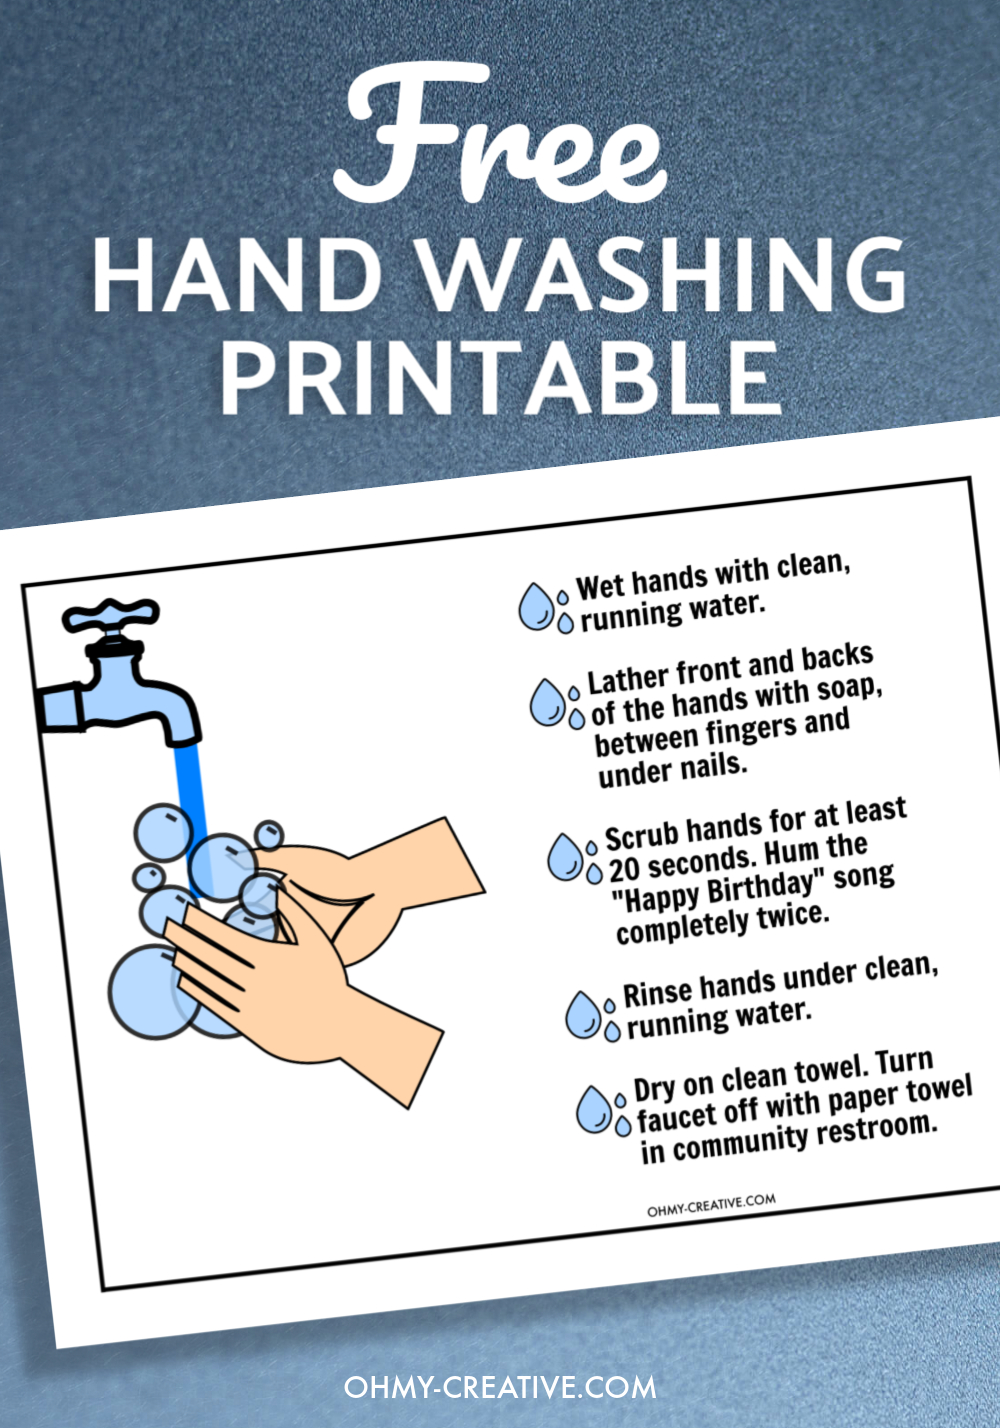 Free Printable Hand Washing Sign - Oh My Creative - Free Printable Handwashing Signs